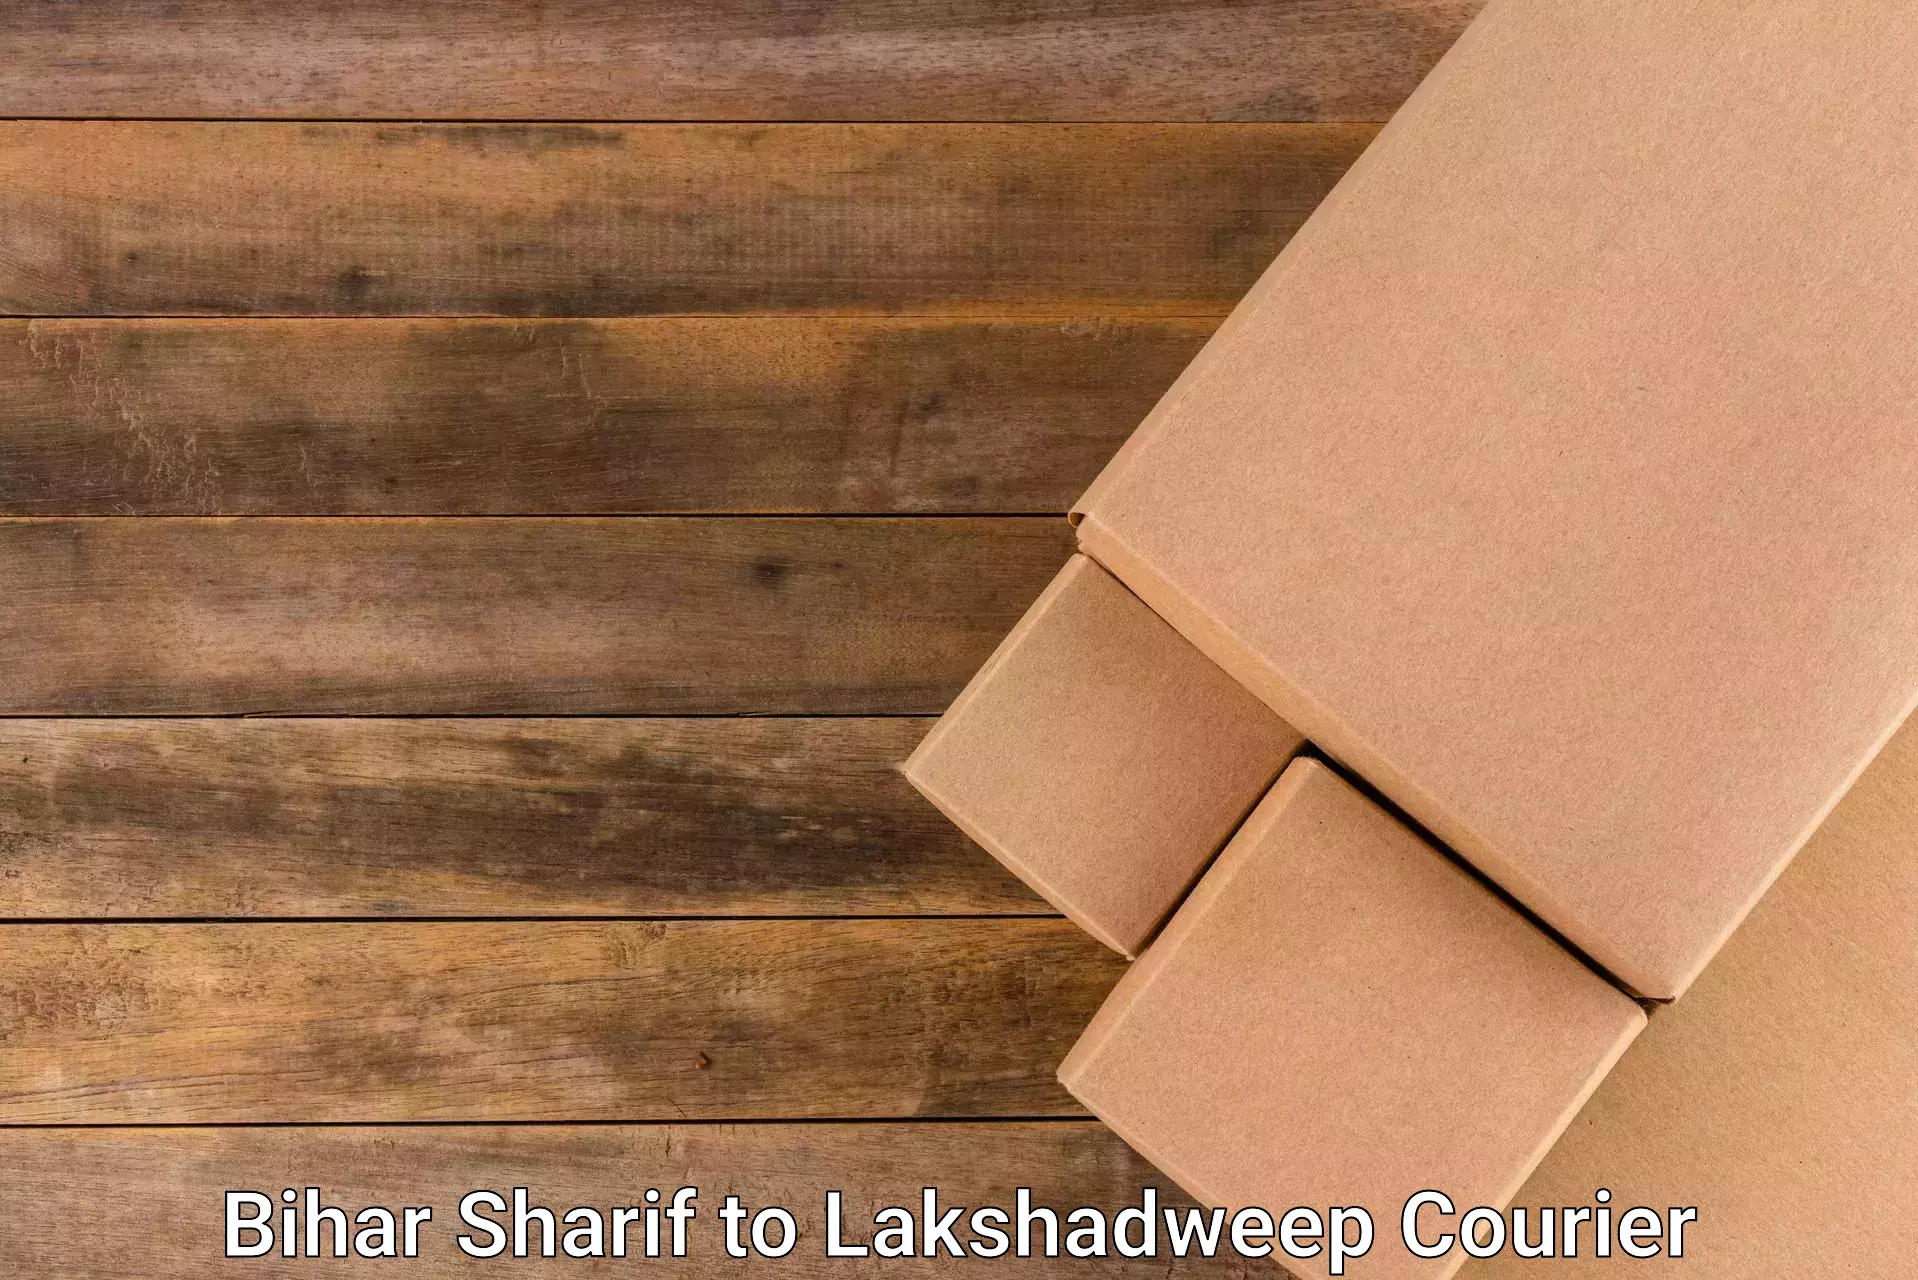 Automated parcel services Bihar Sharif to Lakshadweep